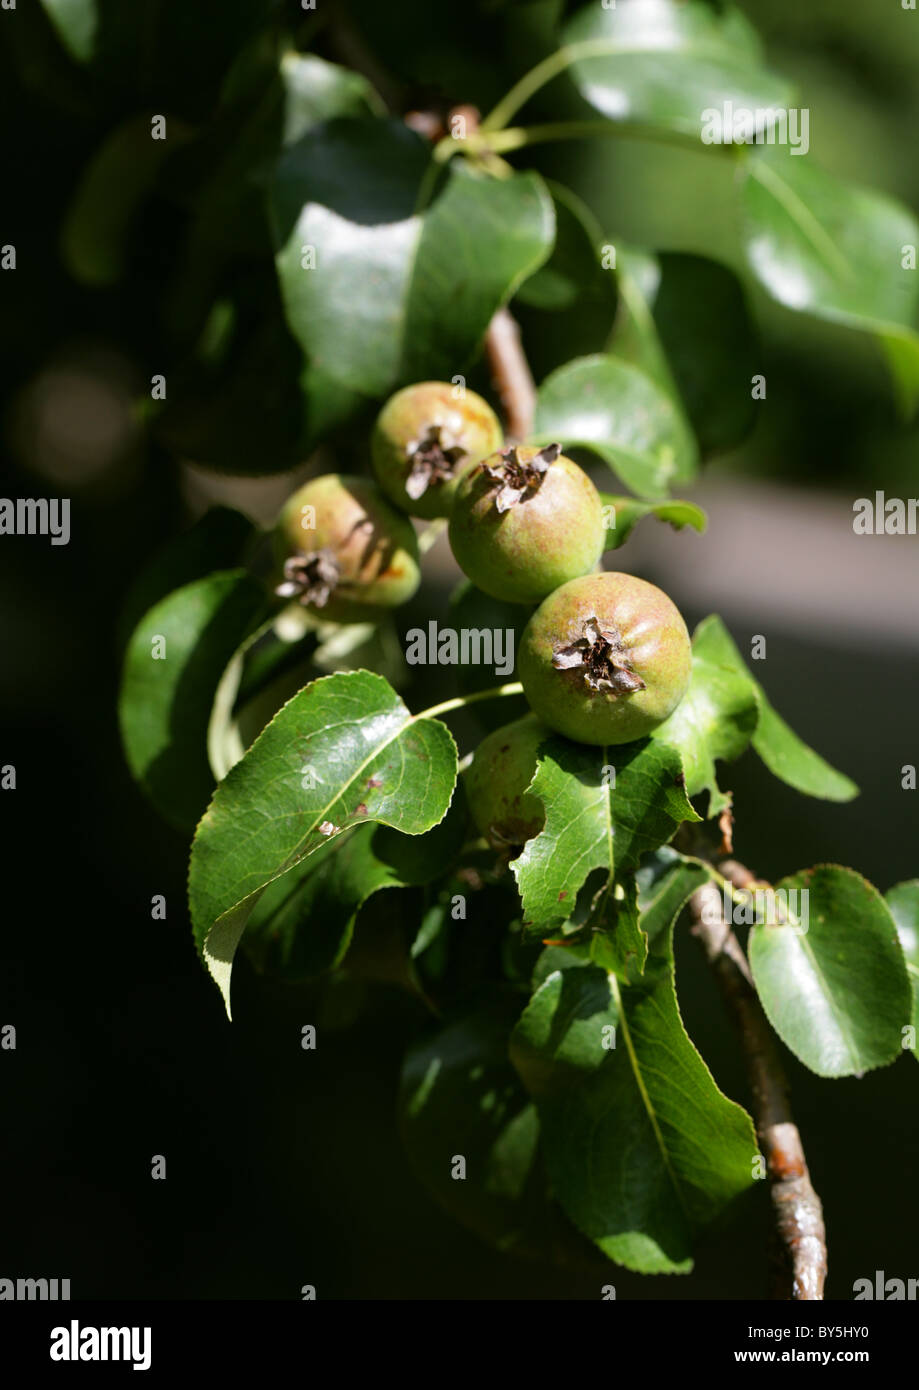 Common (Wild) Pear, Pyrus communis 'Beech Hill', Rosaceae. Immature Fruits. Stock Photo